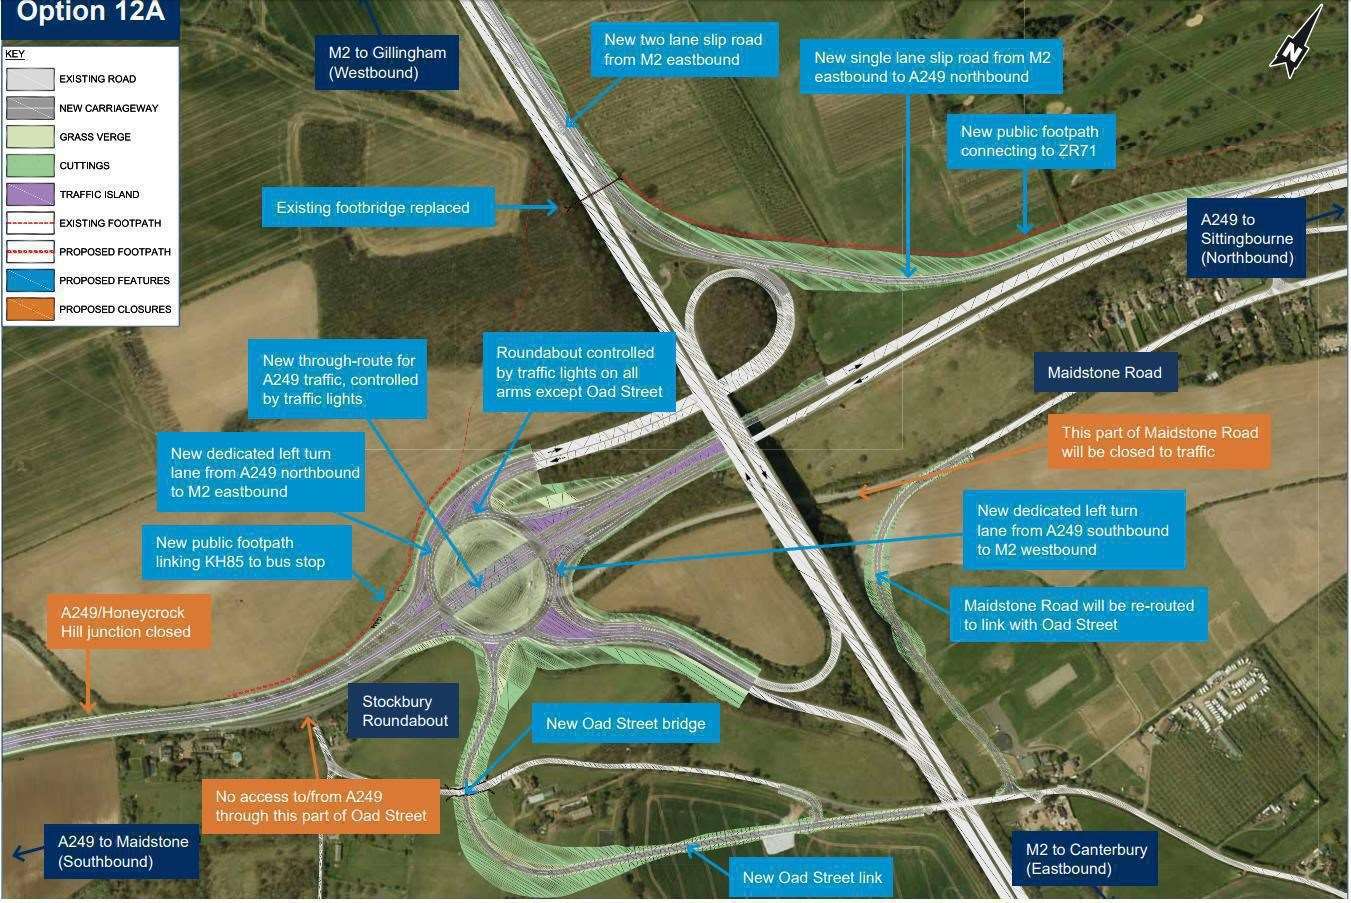 The proposed plans by Highways England to improve M2 Junction 5 for the A249 at Stockbury Roundabout